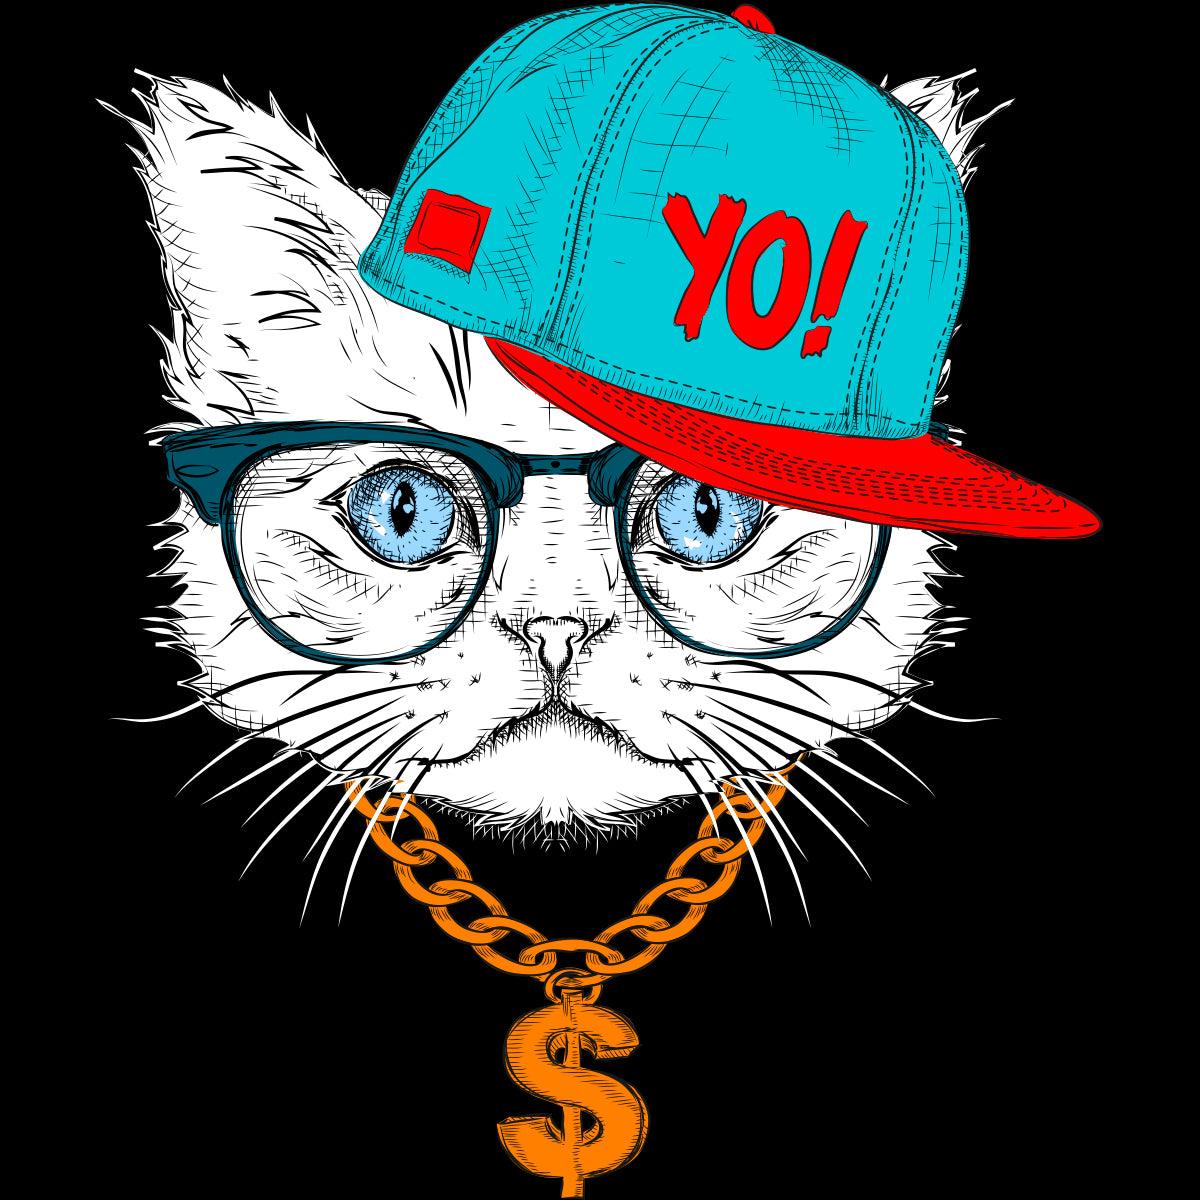 Hip Hop T-Shirt Cat with the Glasses and Hat Tank Top - Kuzi Tees